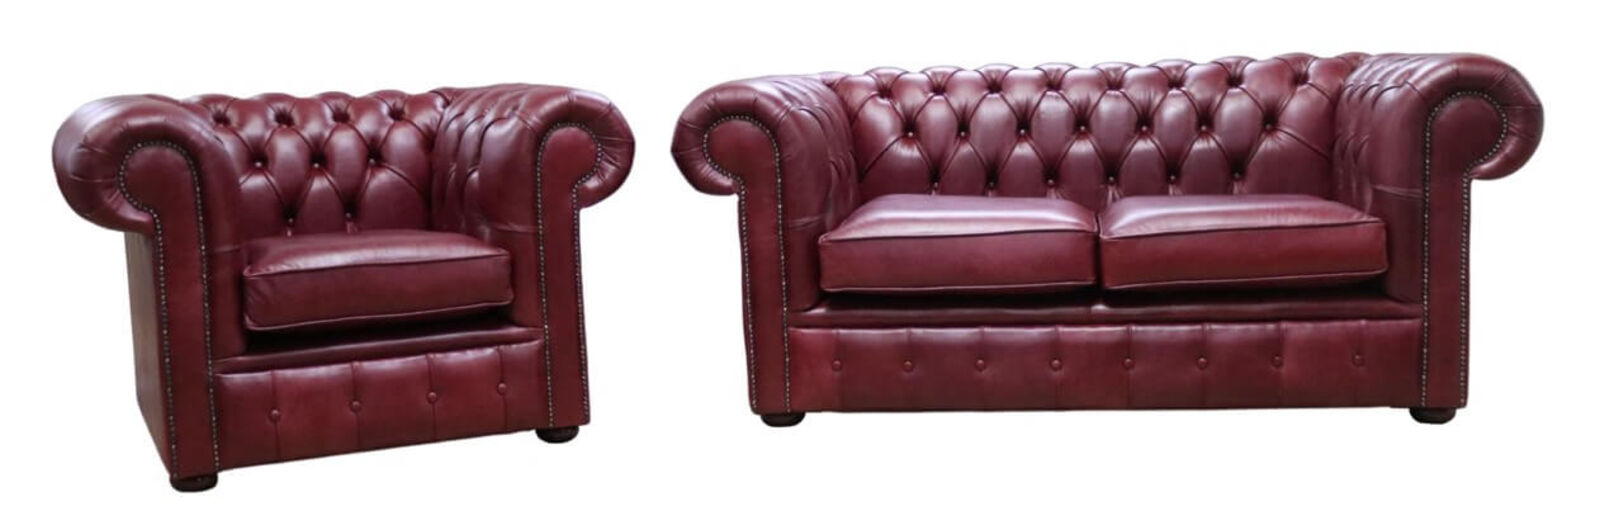 Product photograph of Chesterfield 2 Seater Club Chair Old English Burgandy Leather Sofa Offer from Designer Sofas 4U